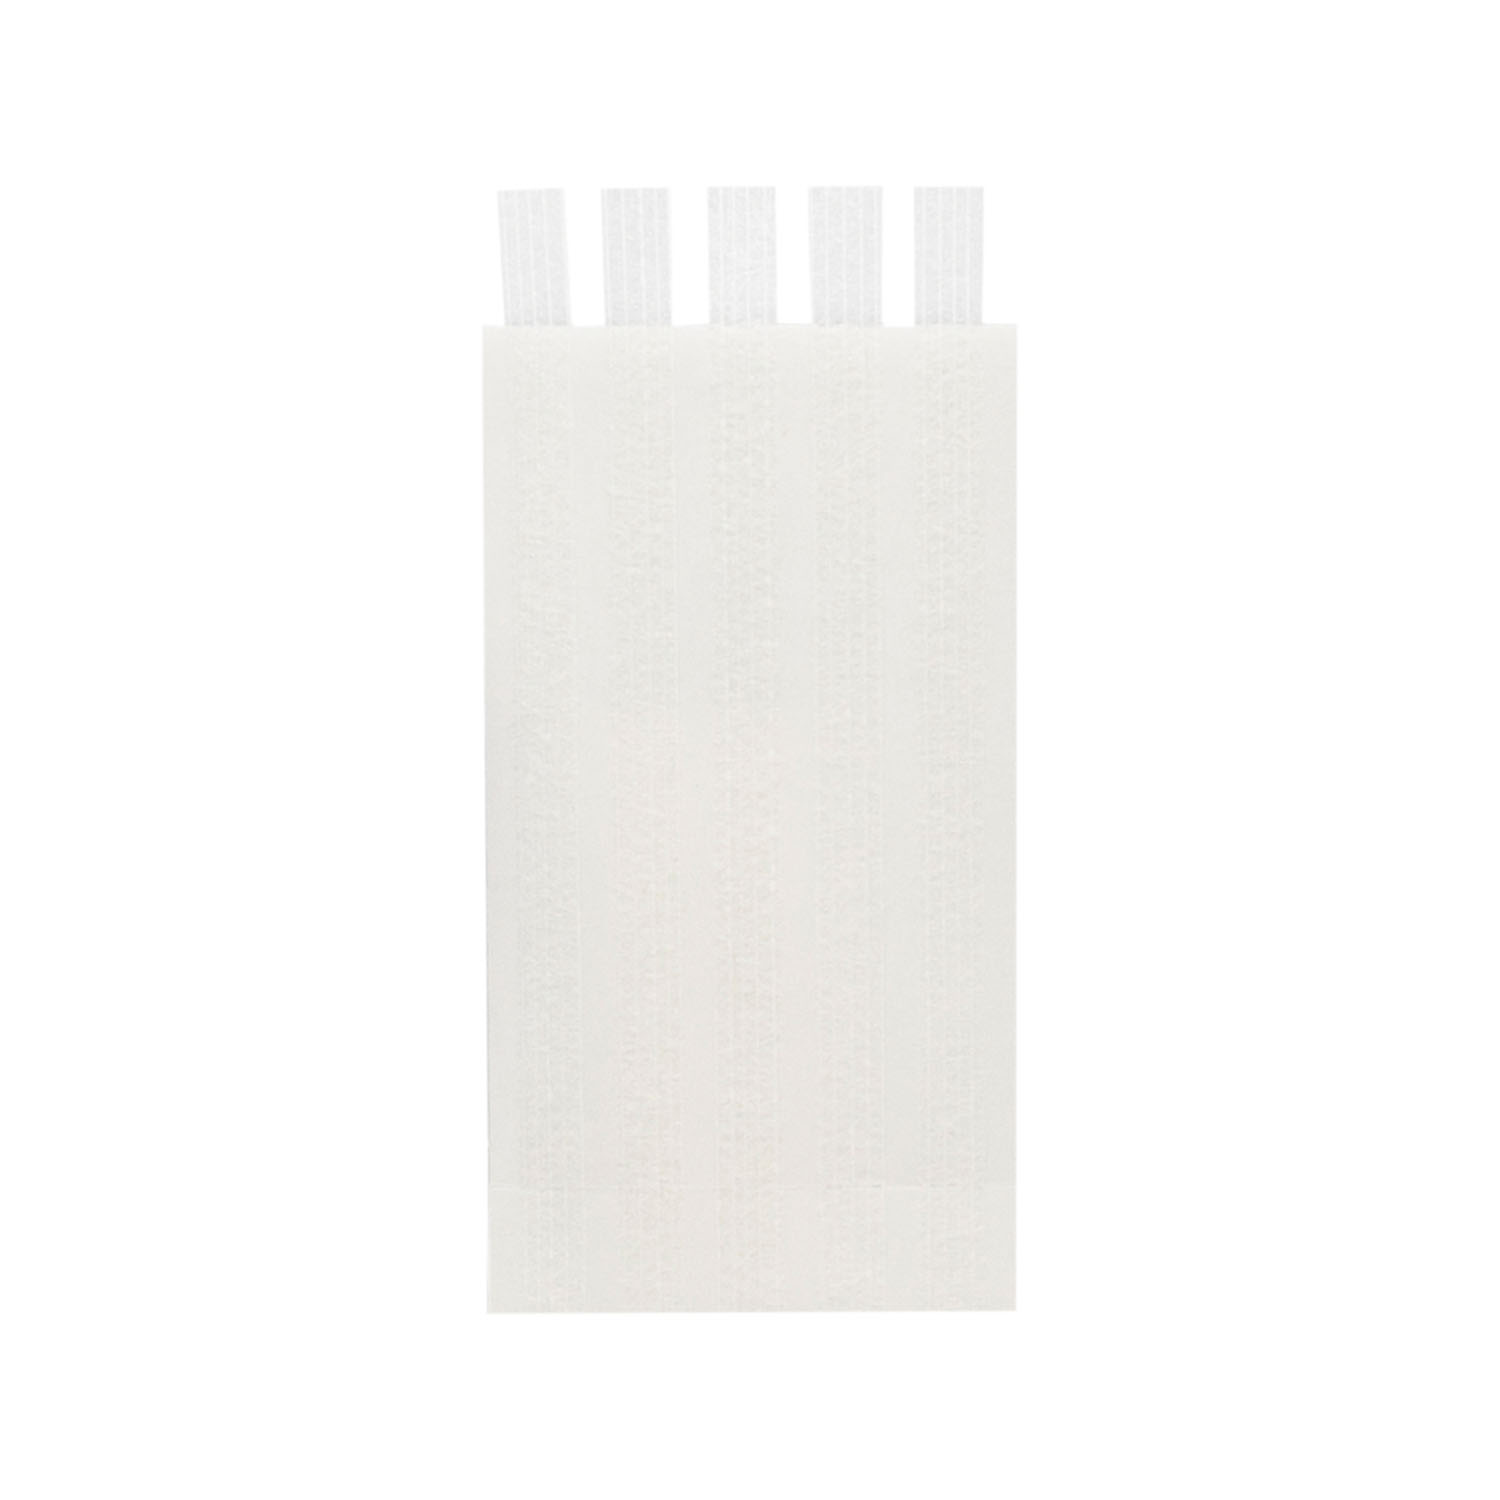 DUKAL WOUND CLOSURE STRIPS : 5156 CS                       $189.85 Stocked